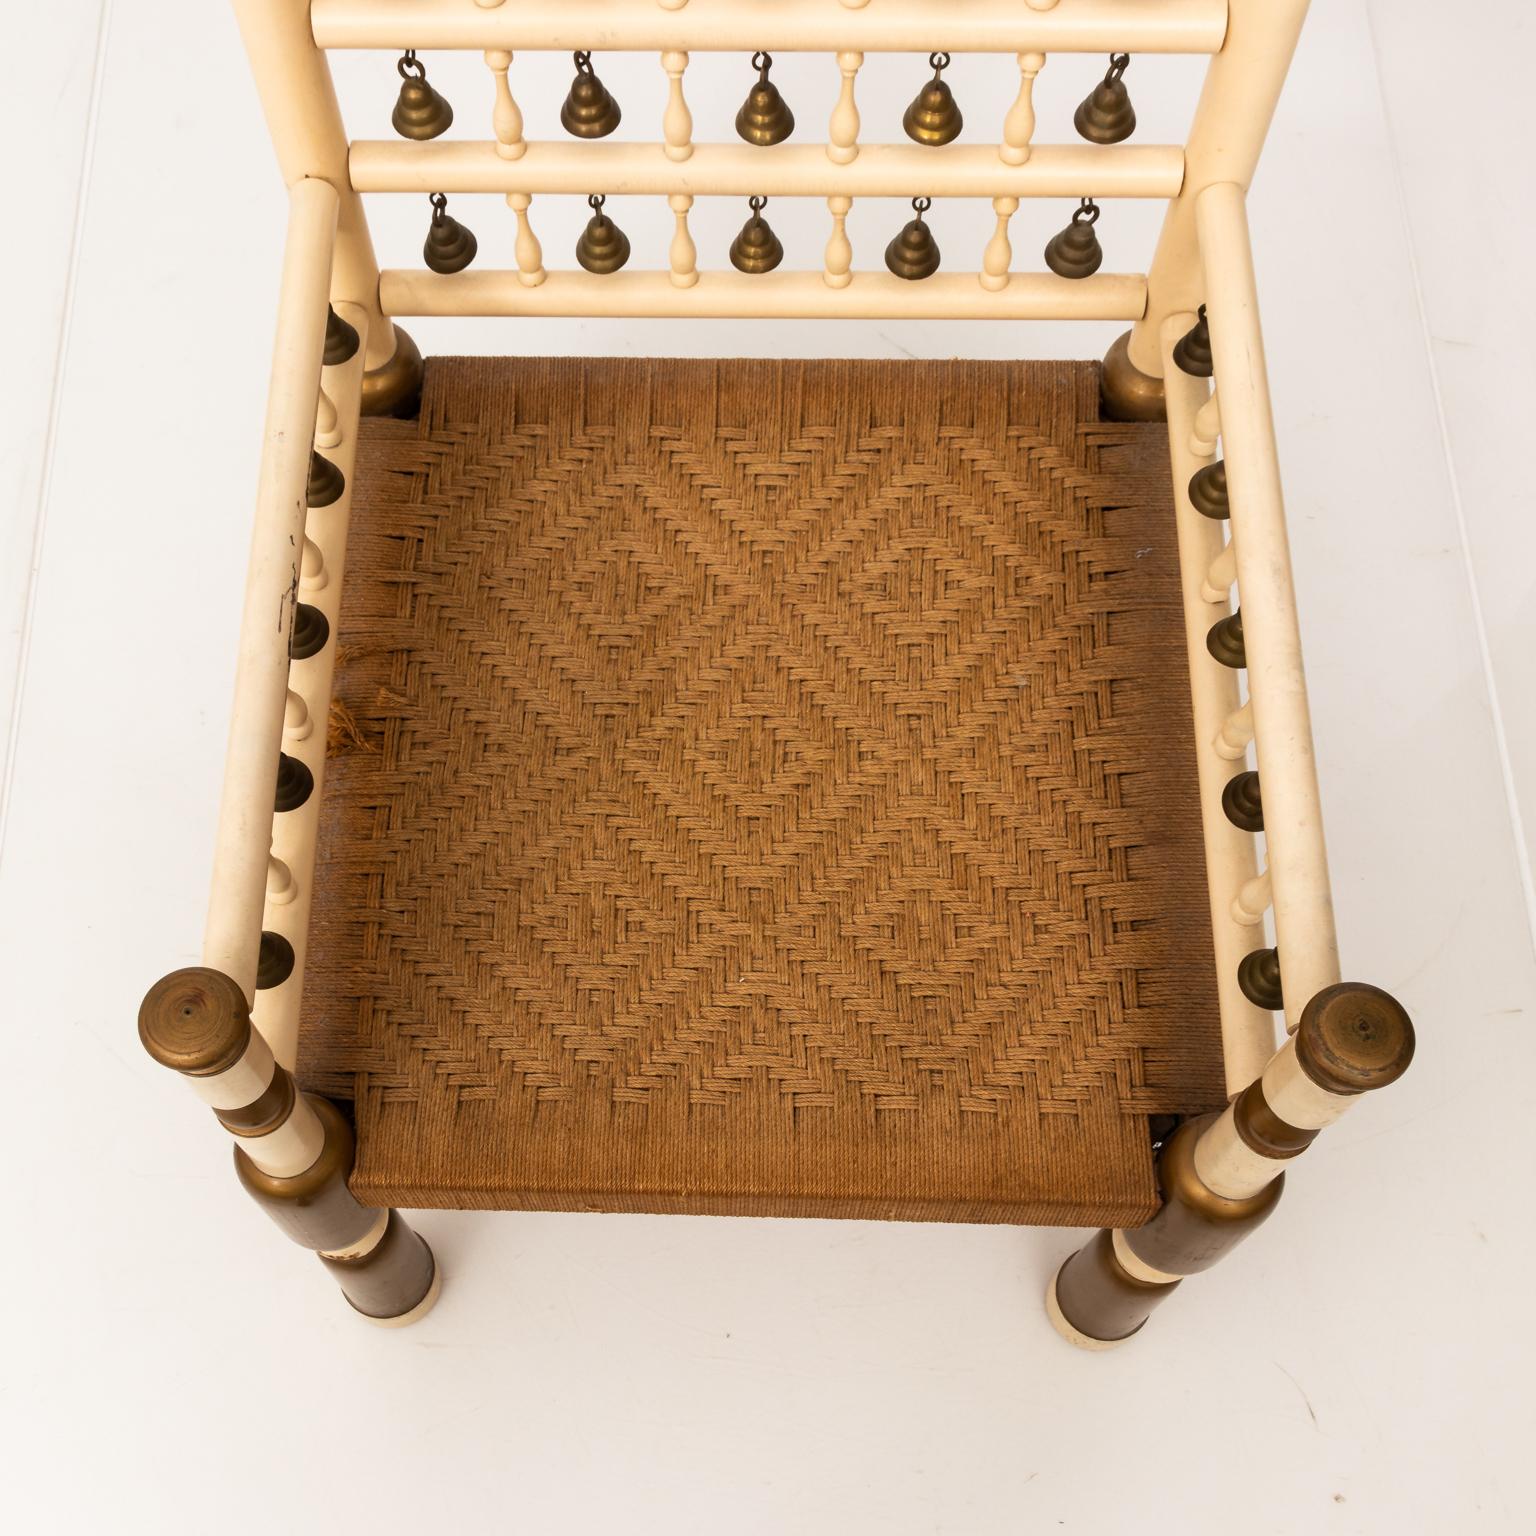 Anlgo-Indian Palace Armchair with Bells 5